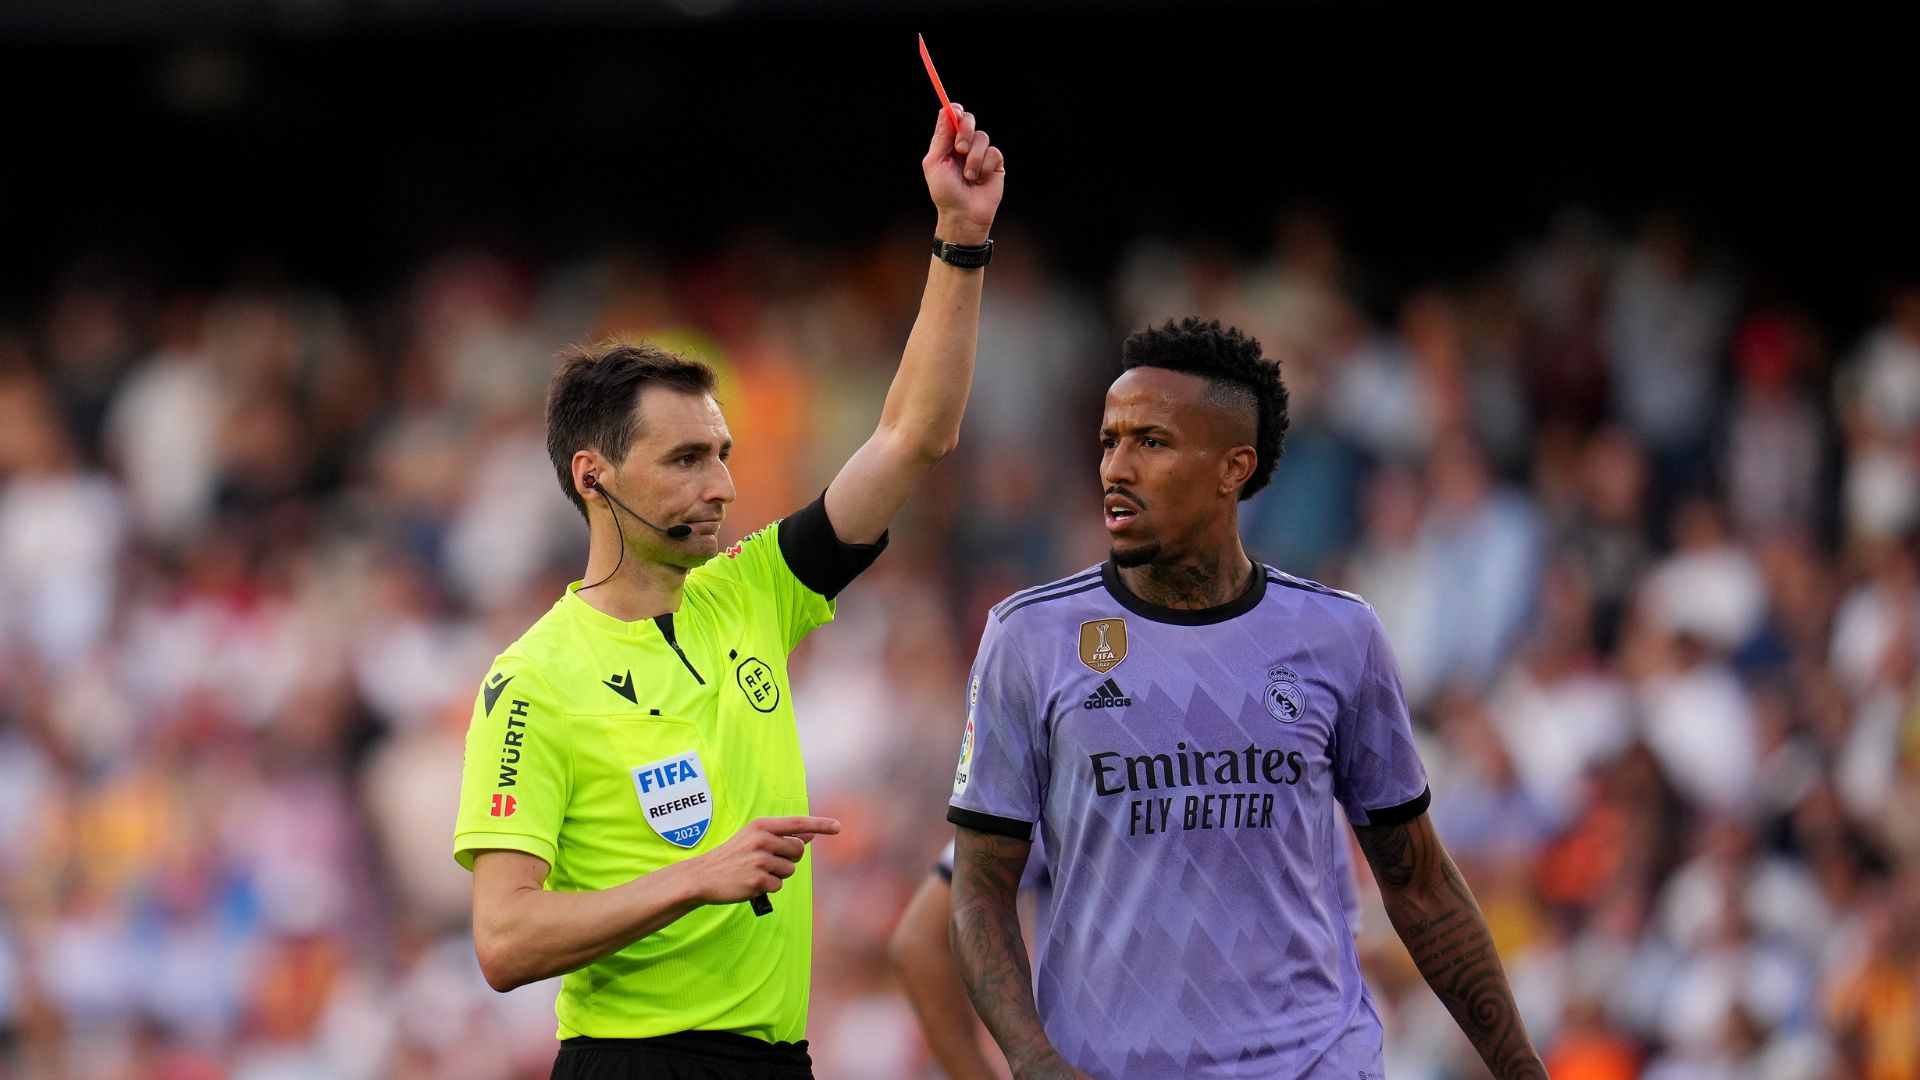 Éder Militão next to the referee of Valencia x Real Madrid, at the moment of Vini Jr's expulsion (Credit: Getty Images)